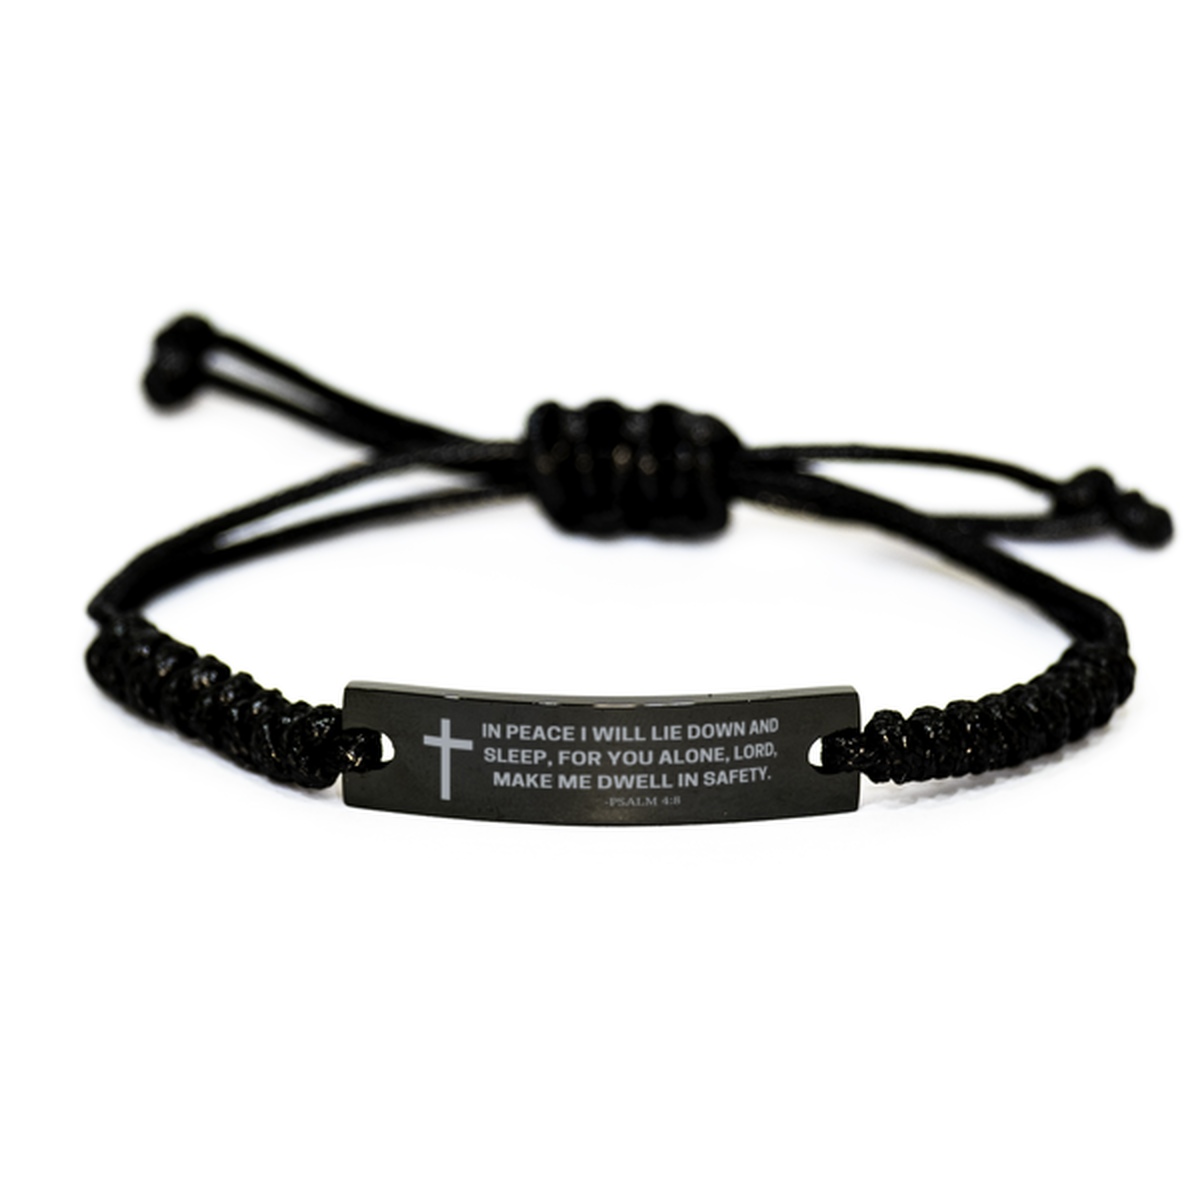 Baptism Gifts For Teenage Boys Girls, Christian Bible Verse Black Rope Bracelet, In peace I will lie down and sleep, Catholic Confirmation Gifts for Son, Godson, Grandson, Nephew